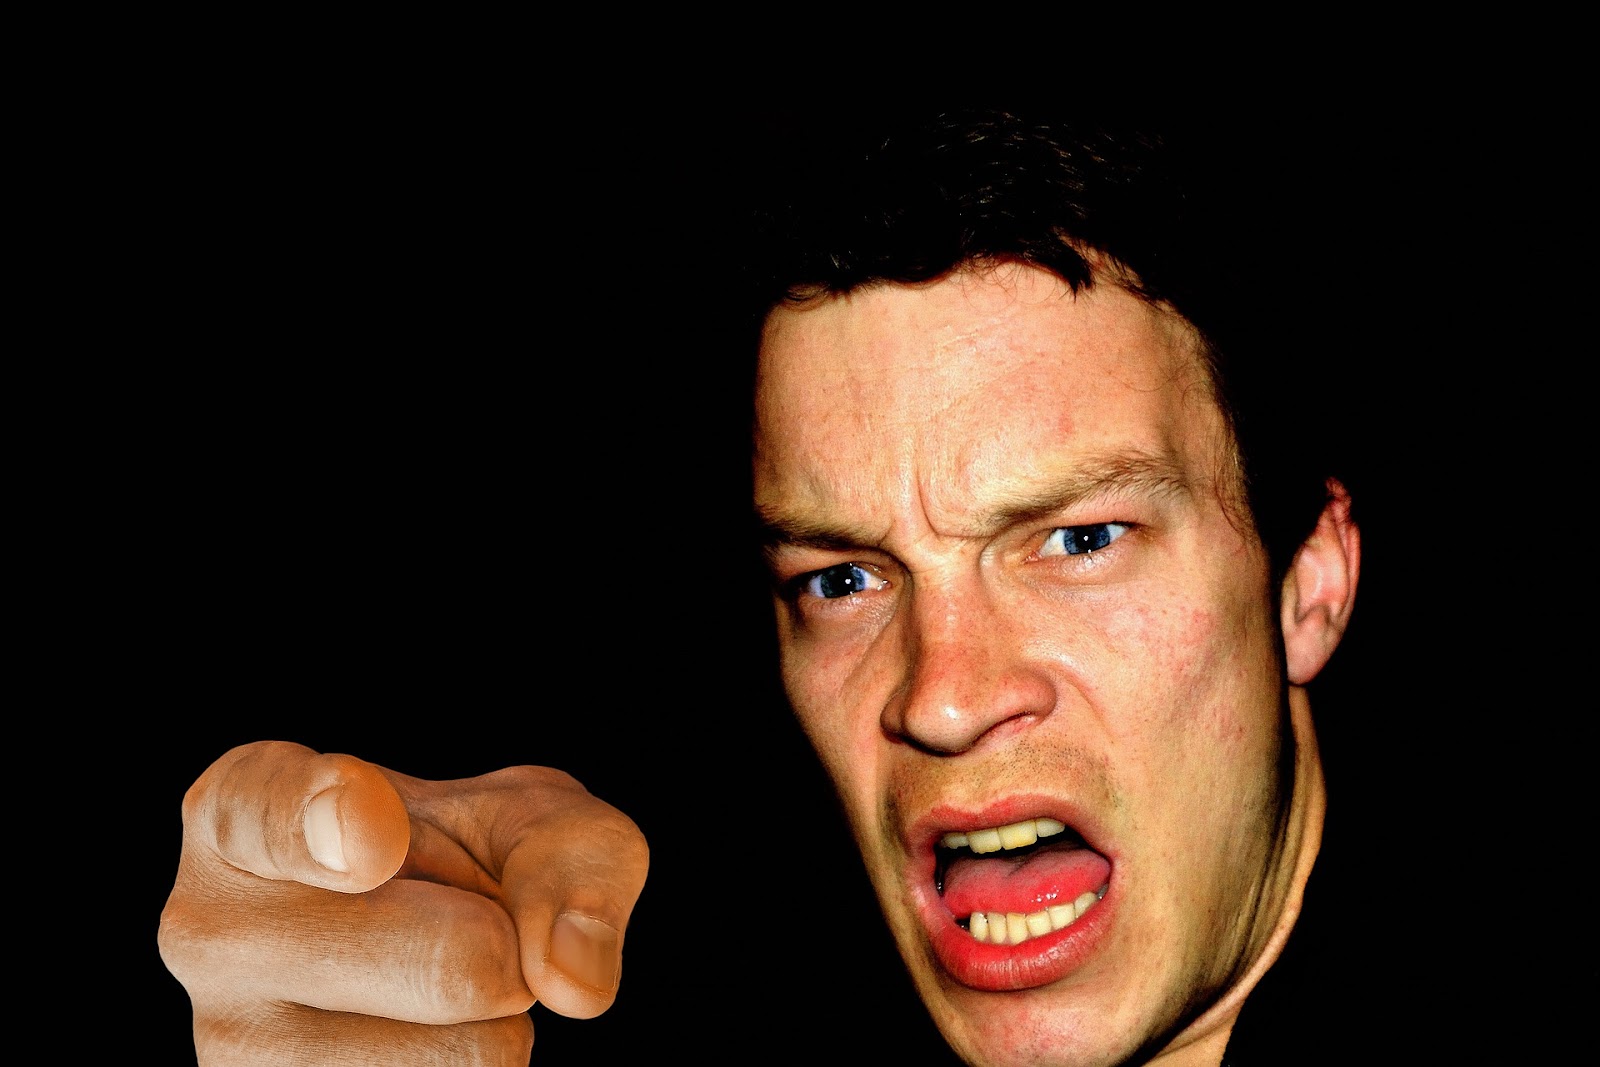 A picture of an angry man, screaming while pointing at the camera.